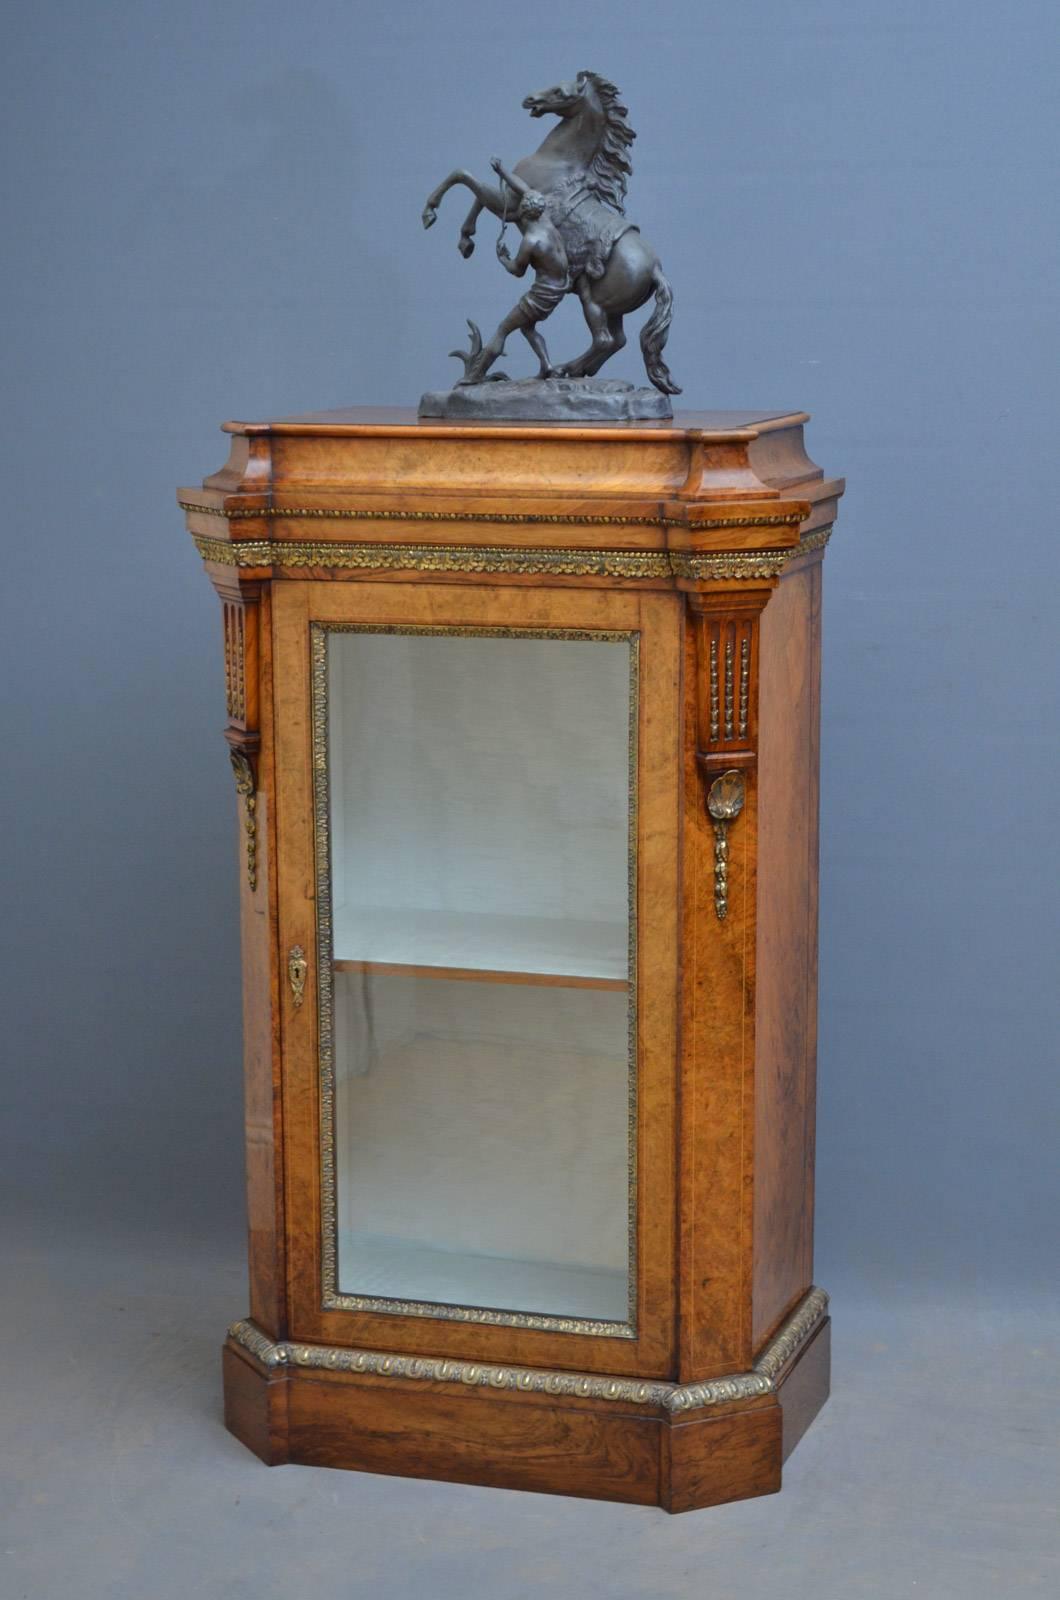 Sn4204 A superb quality, Victorian figured walnut, display cabinet of unusual proportions being tall and slim, having figured walnut, moulded top with concave frieze and glazed door enclosing relined interior, flanked by canted corners with fluted